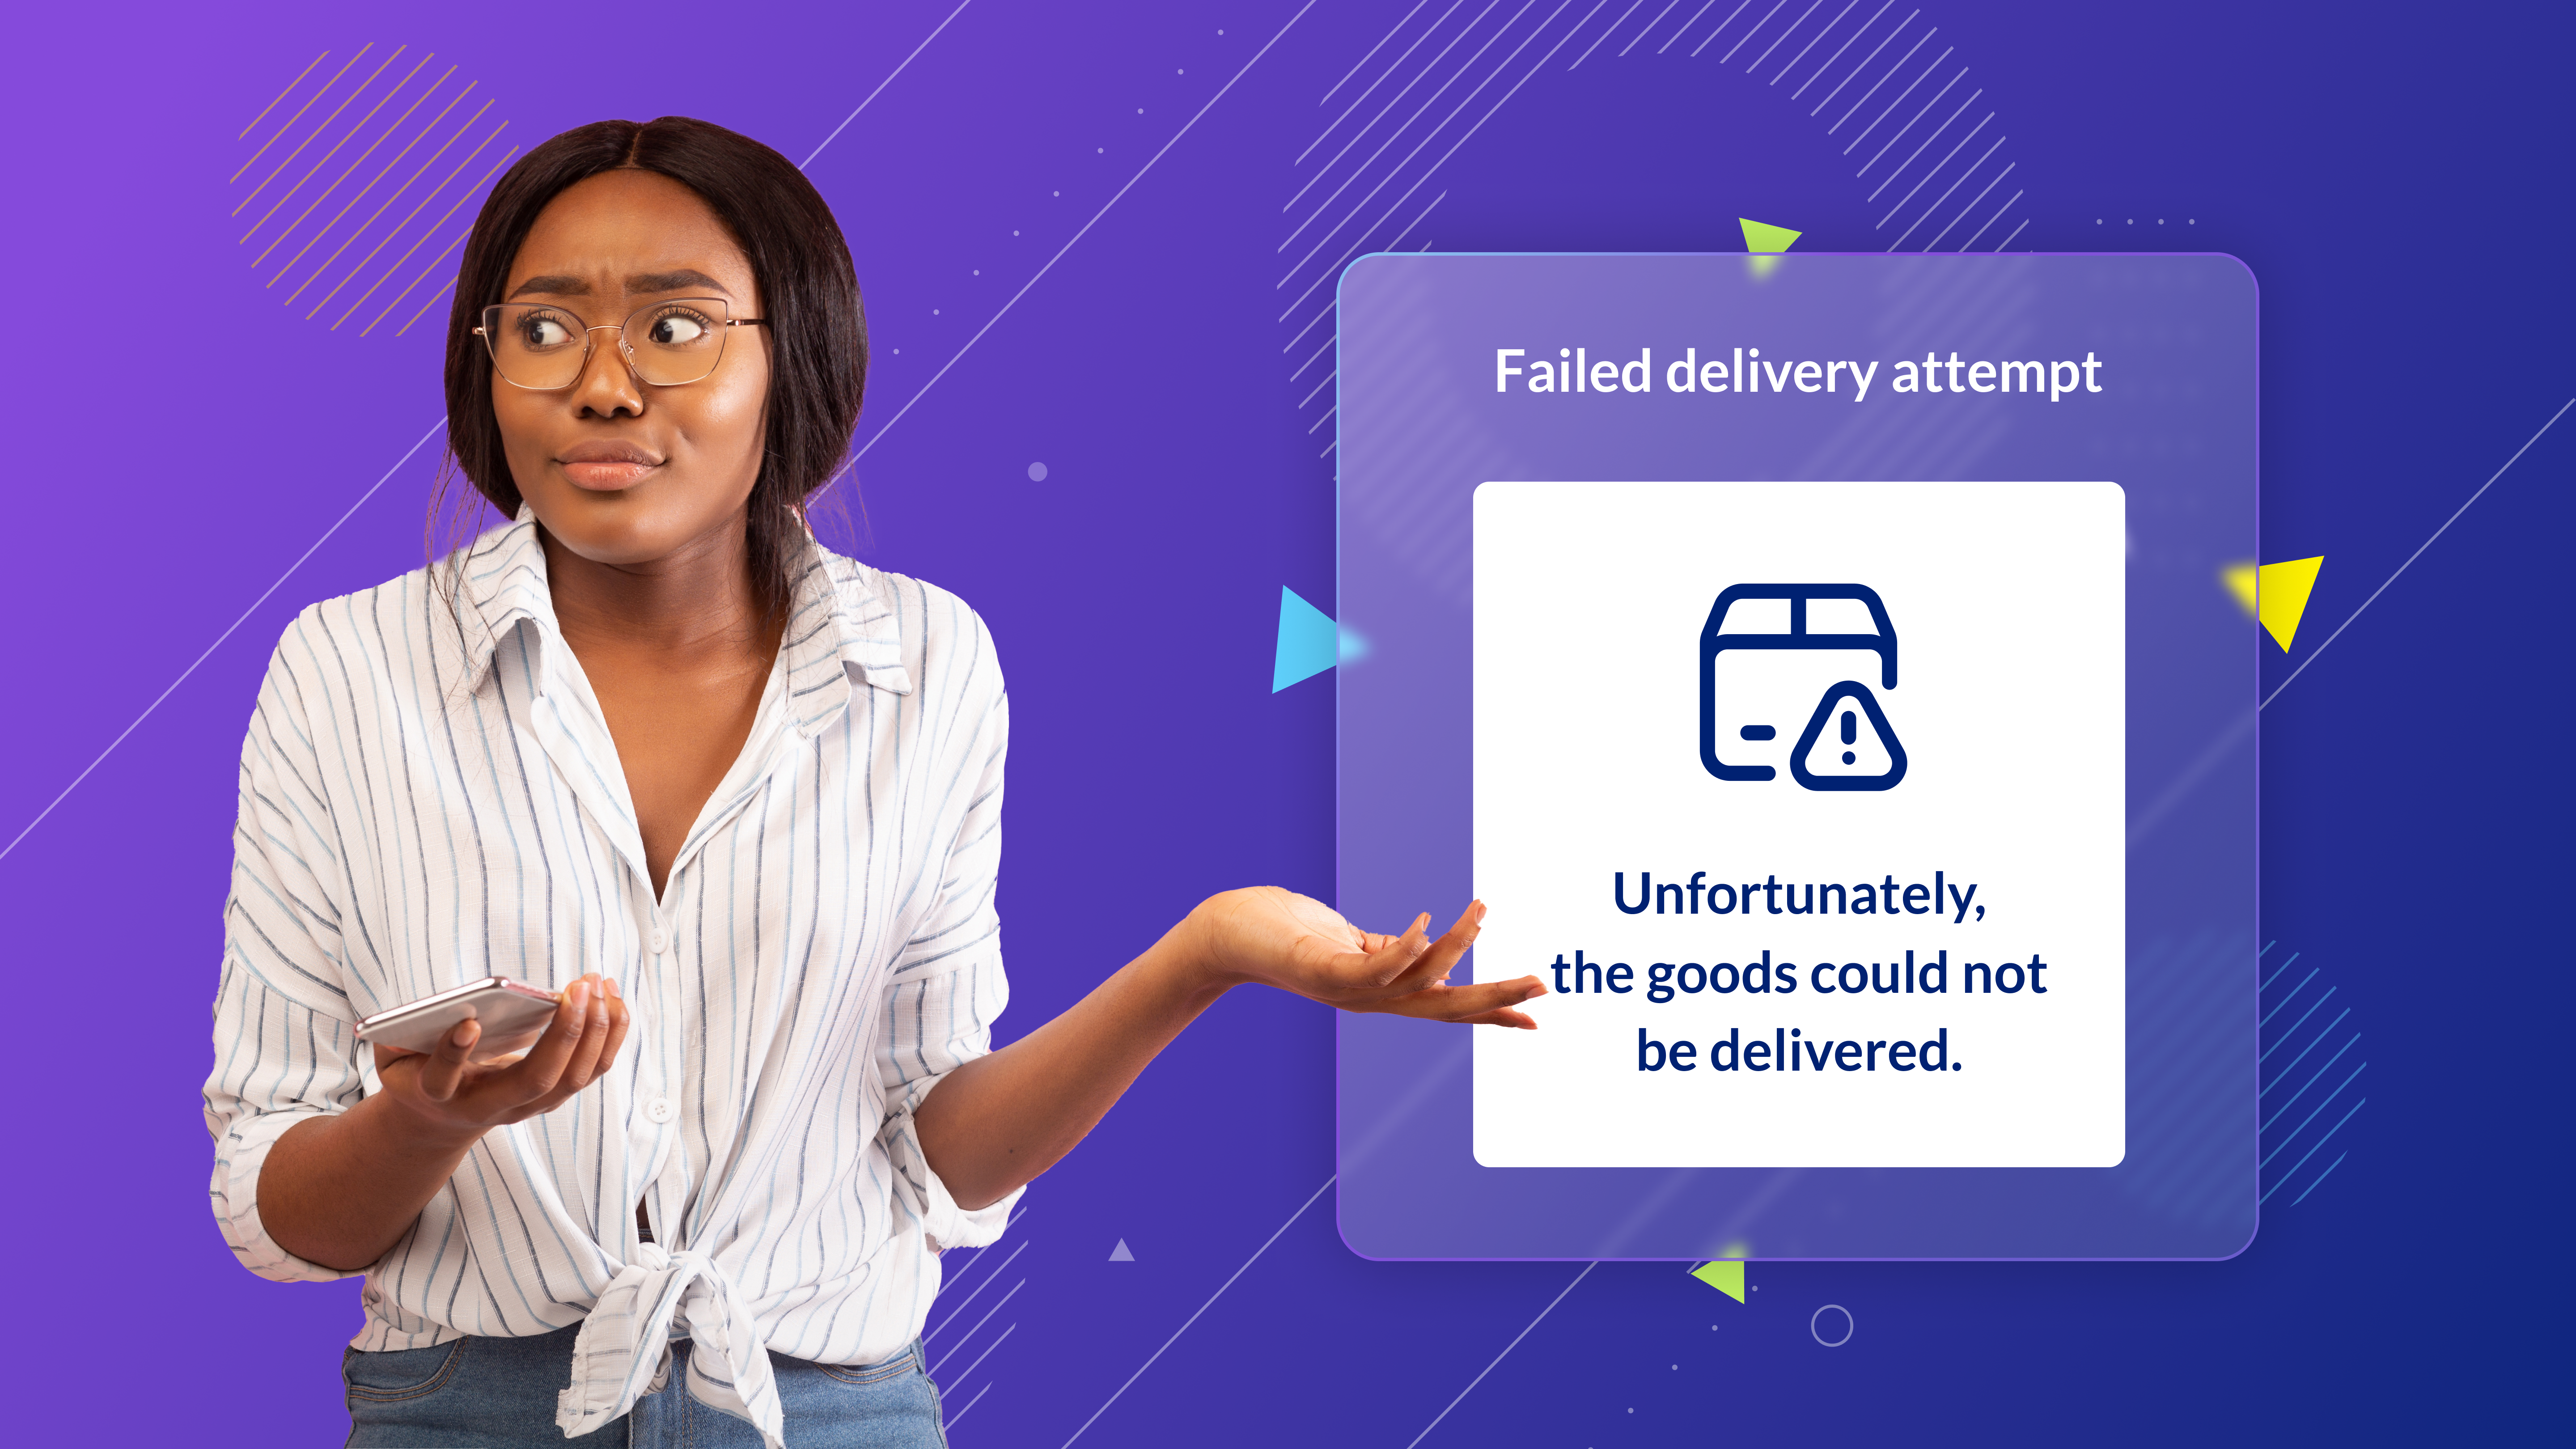 How to Manage Failed Deliveries